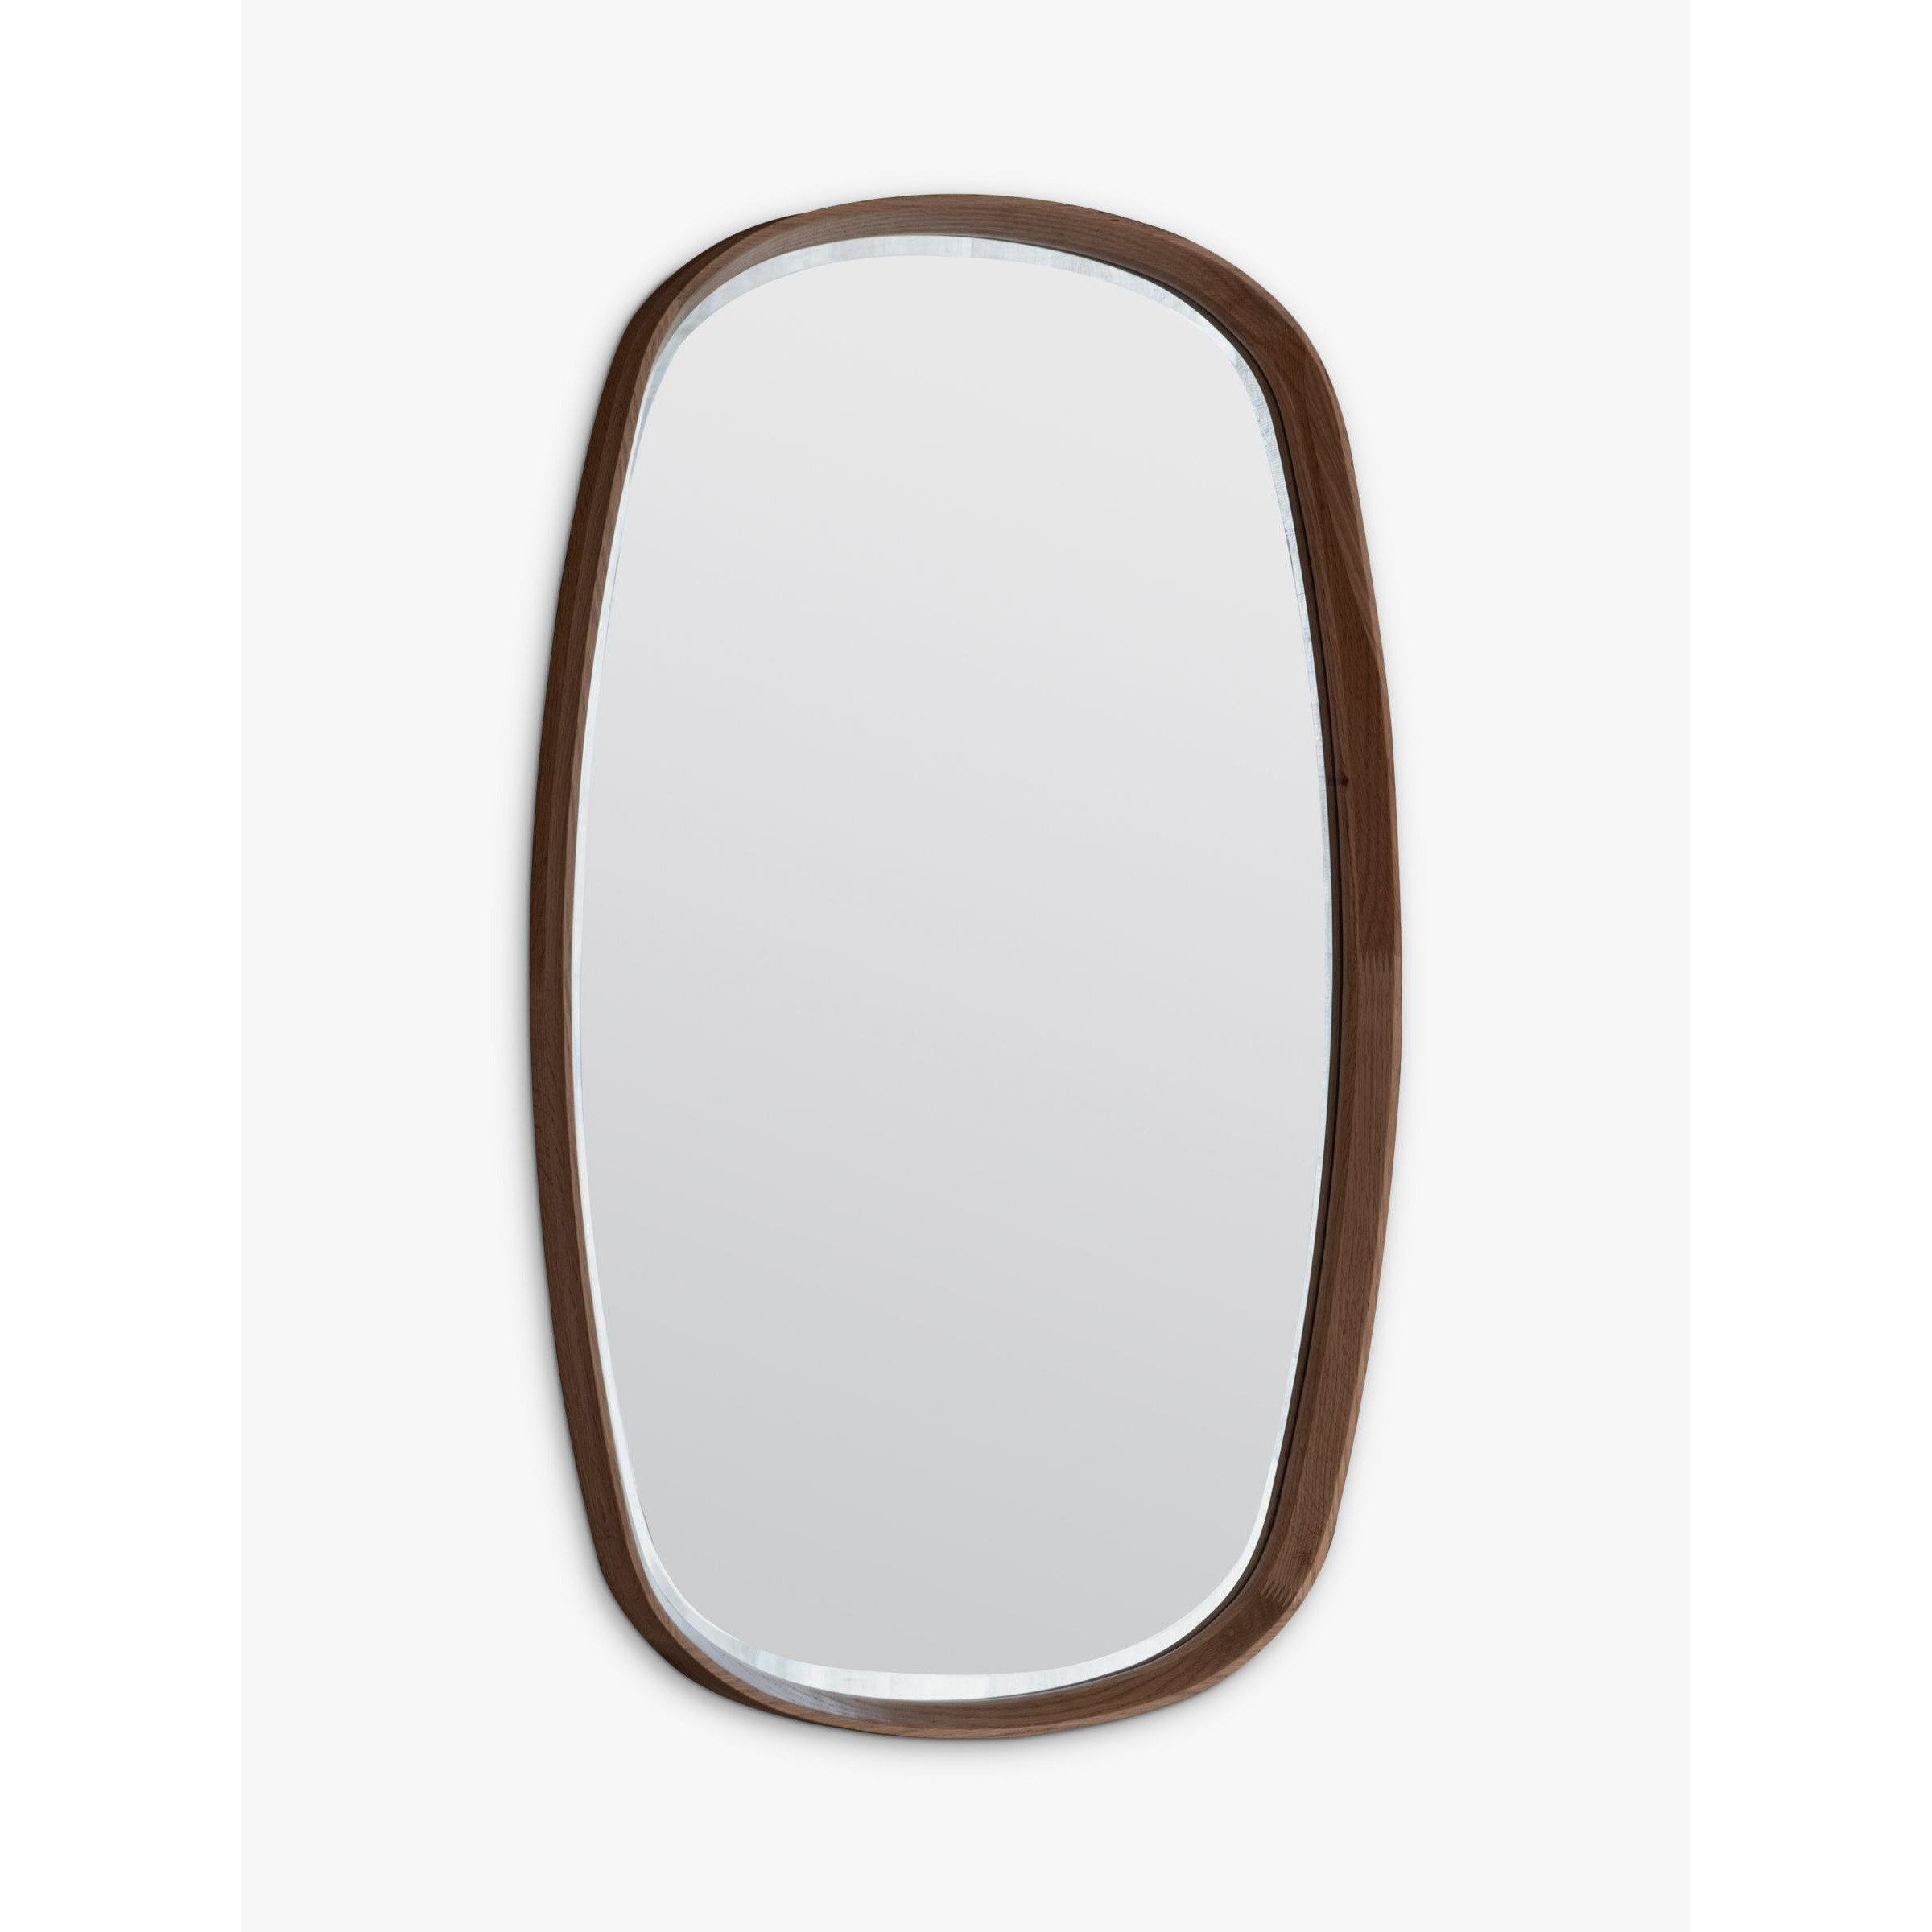 Gallery Direct Keaton Oval Wood Frame Wall Mirror, 90 x 55cm - image 1